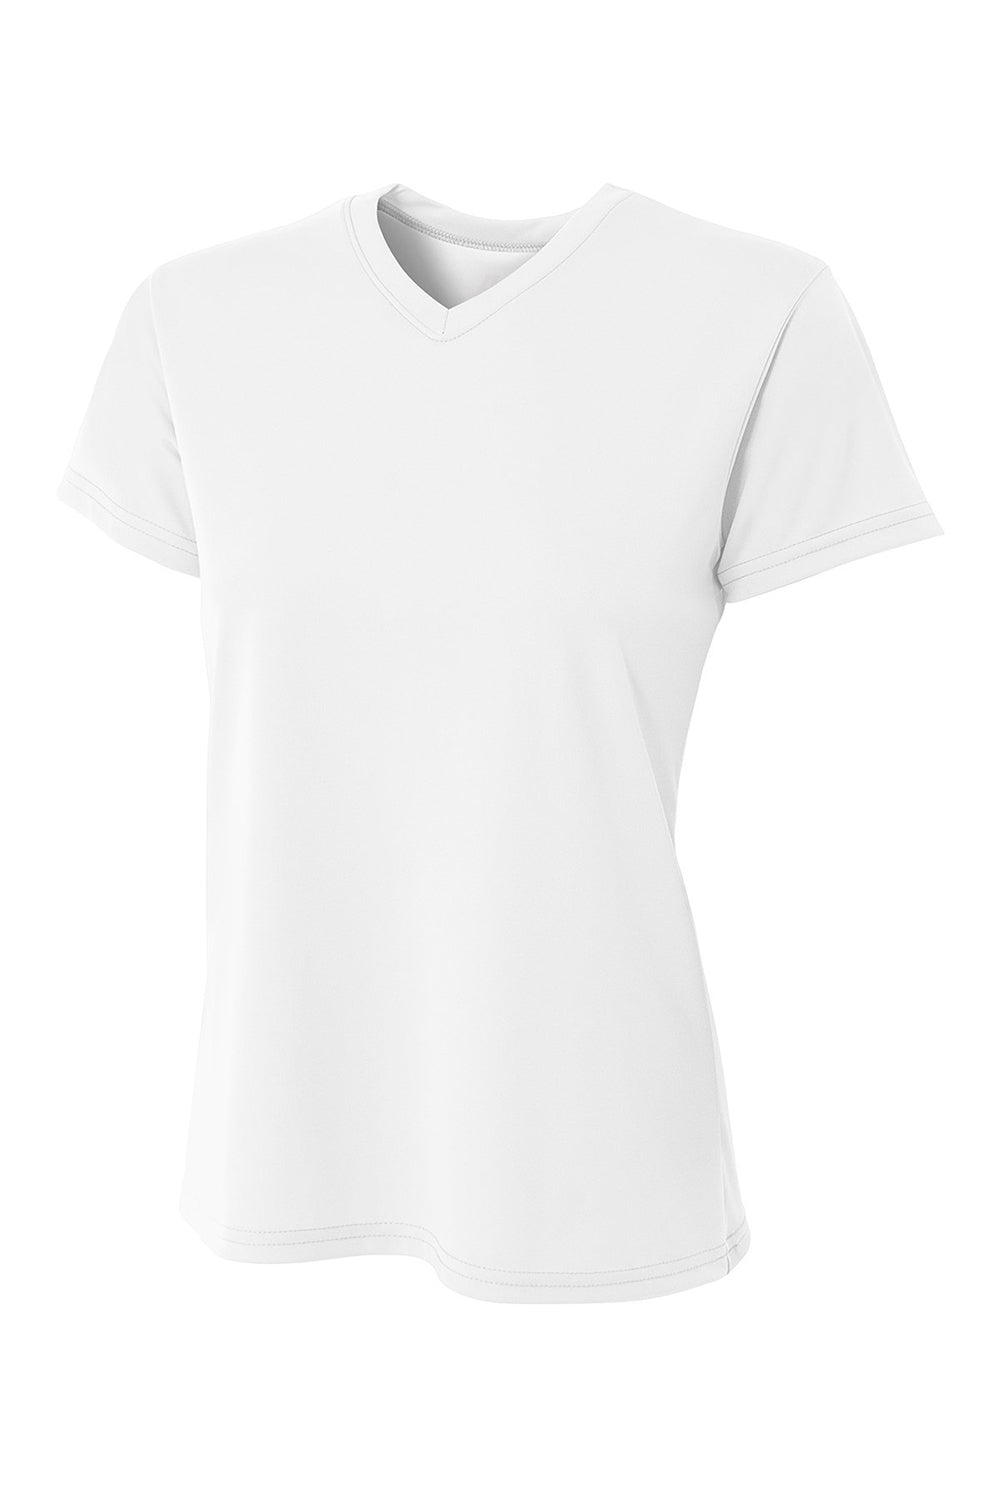 A4 NW3402 Womens Sprint Performance Moisture Wicking Short Sleeve V-Neck T-Shirt White Flat Front